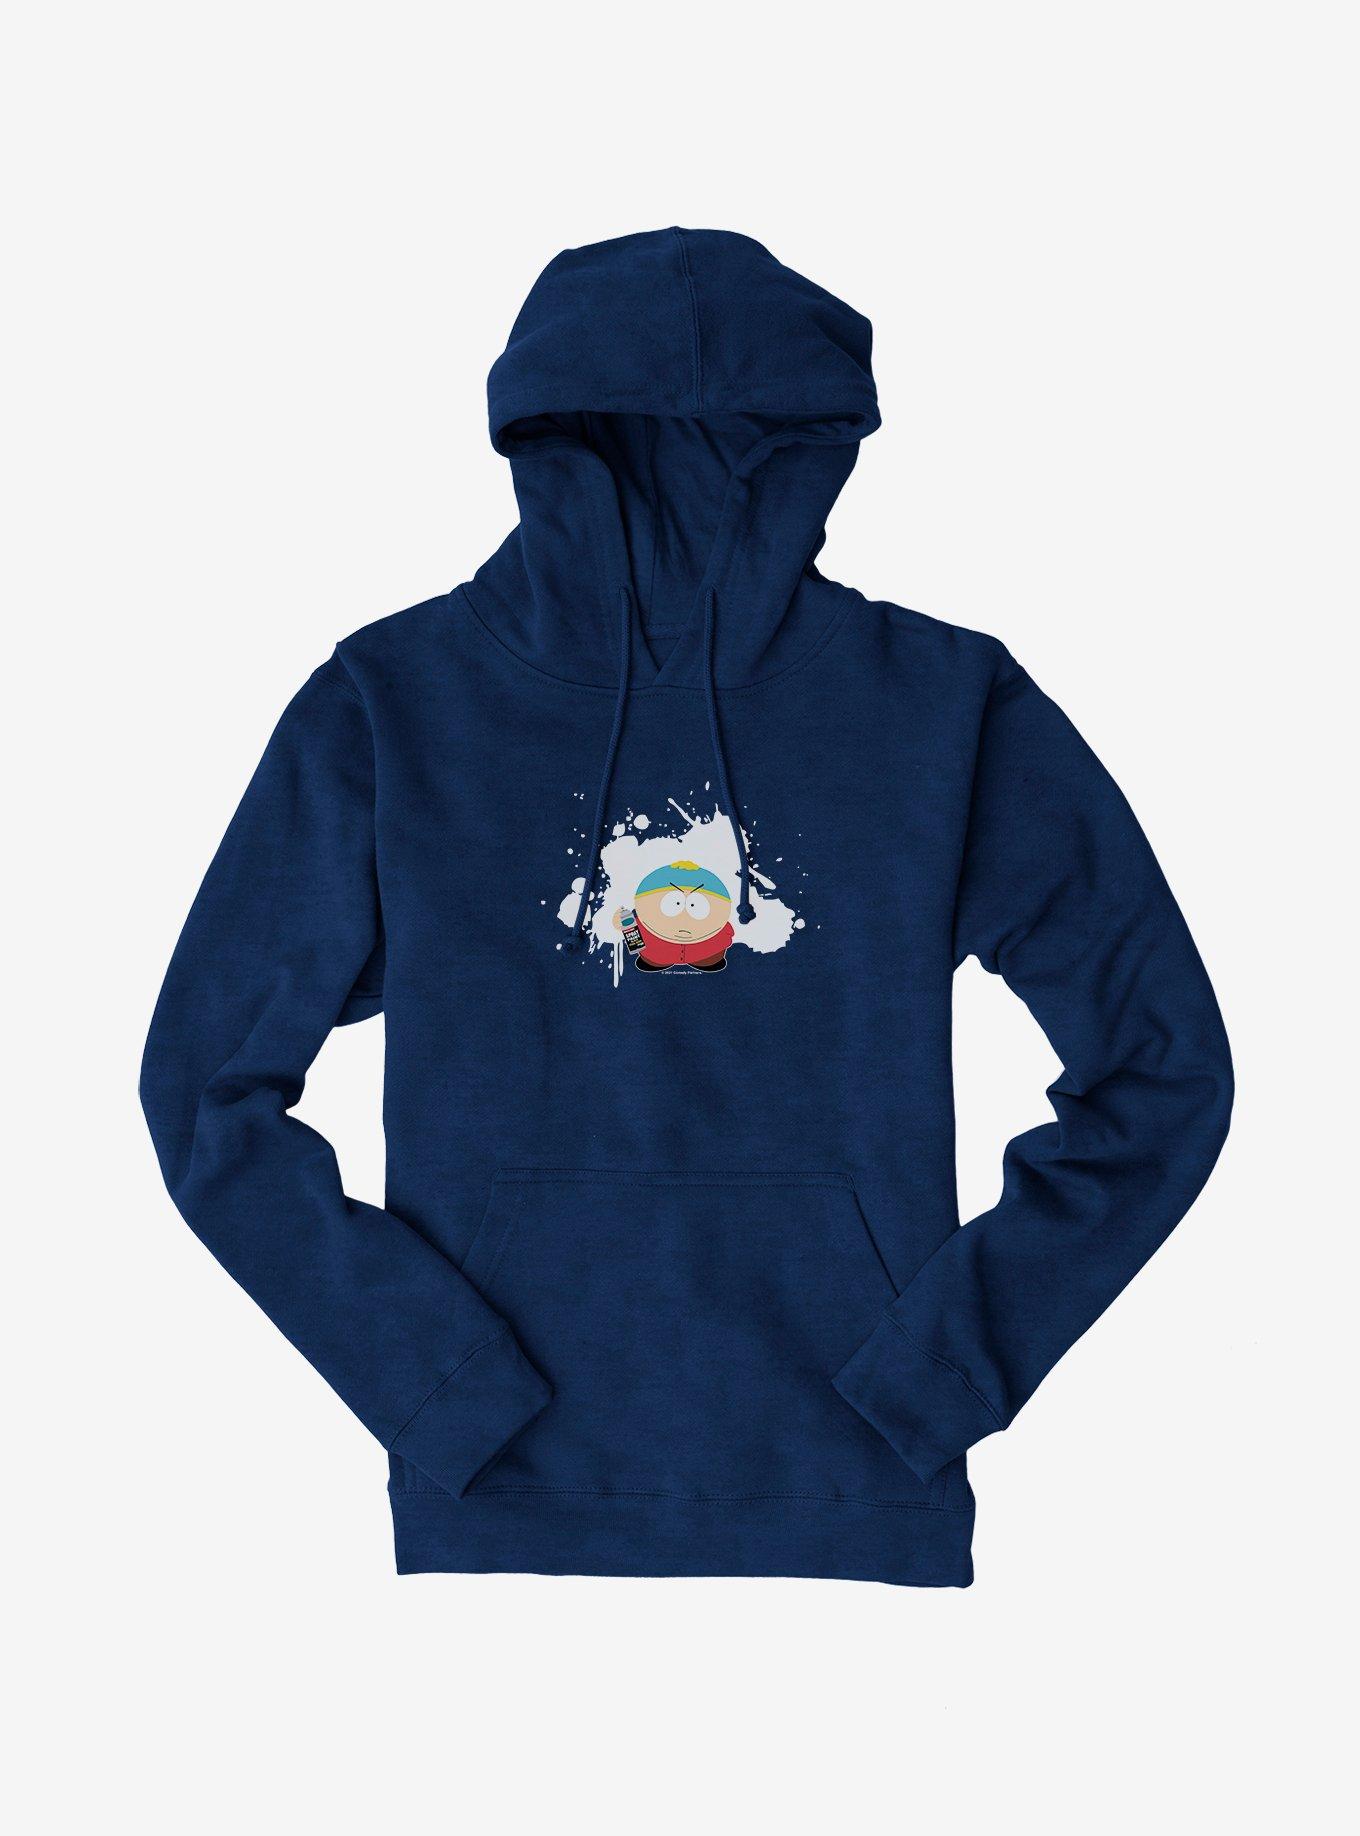 South Park Season Reference Cartman Spray Paint Hoodie | Hot Topic